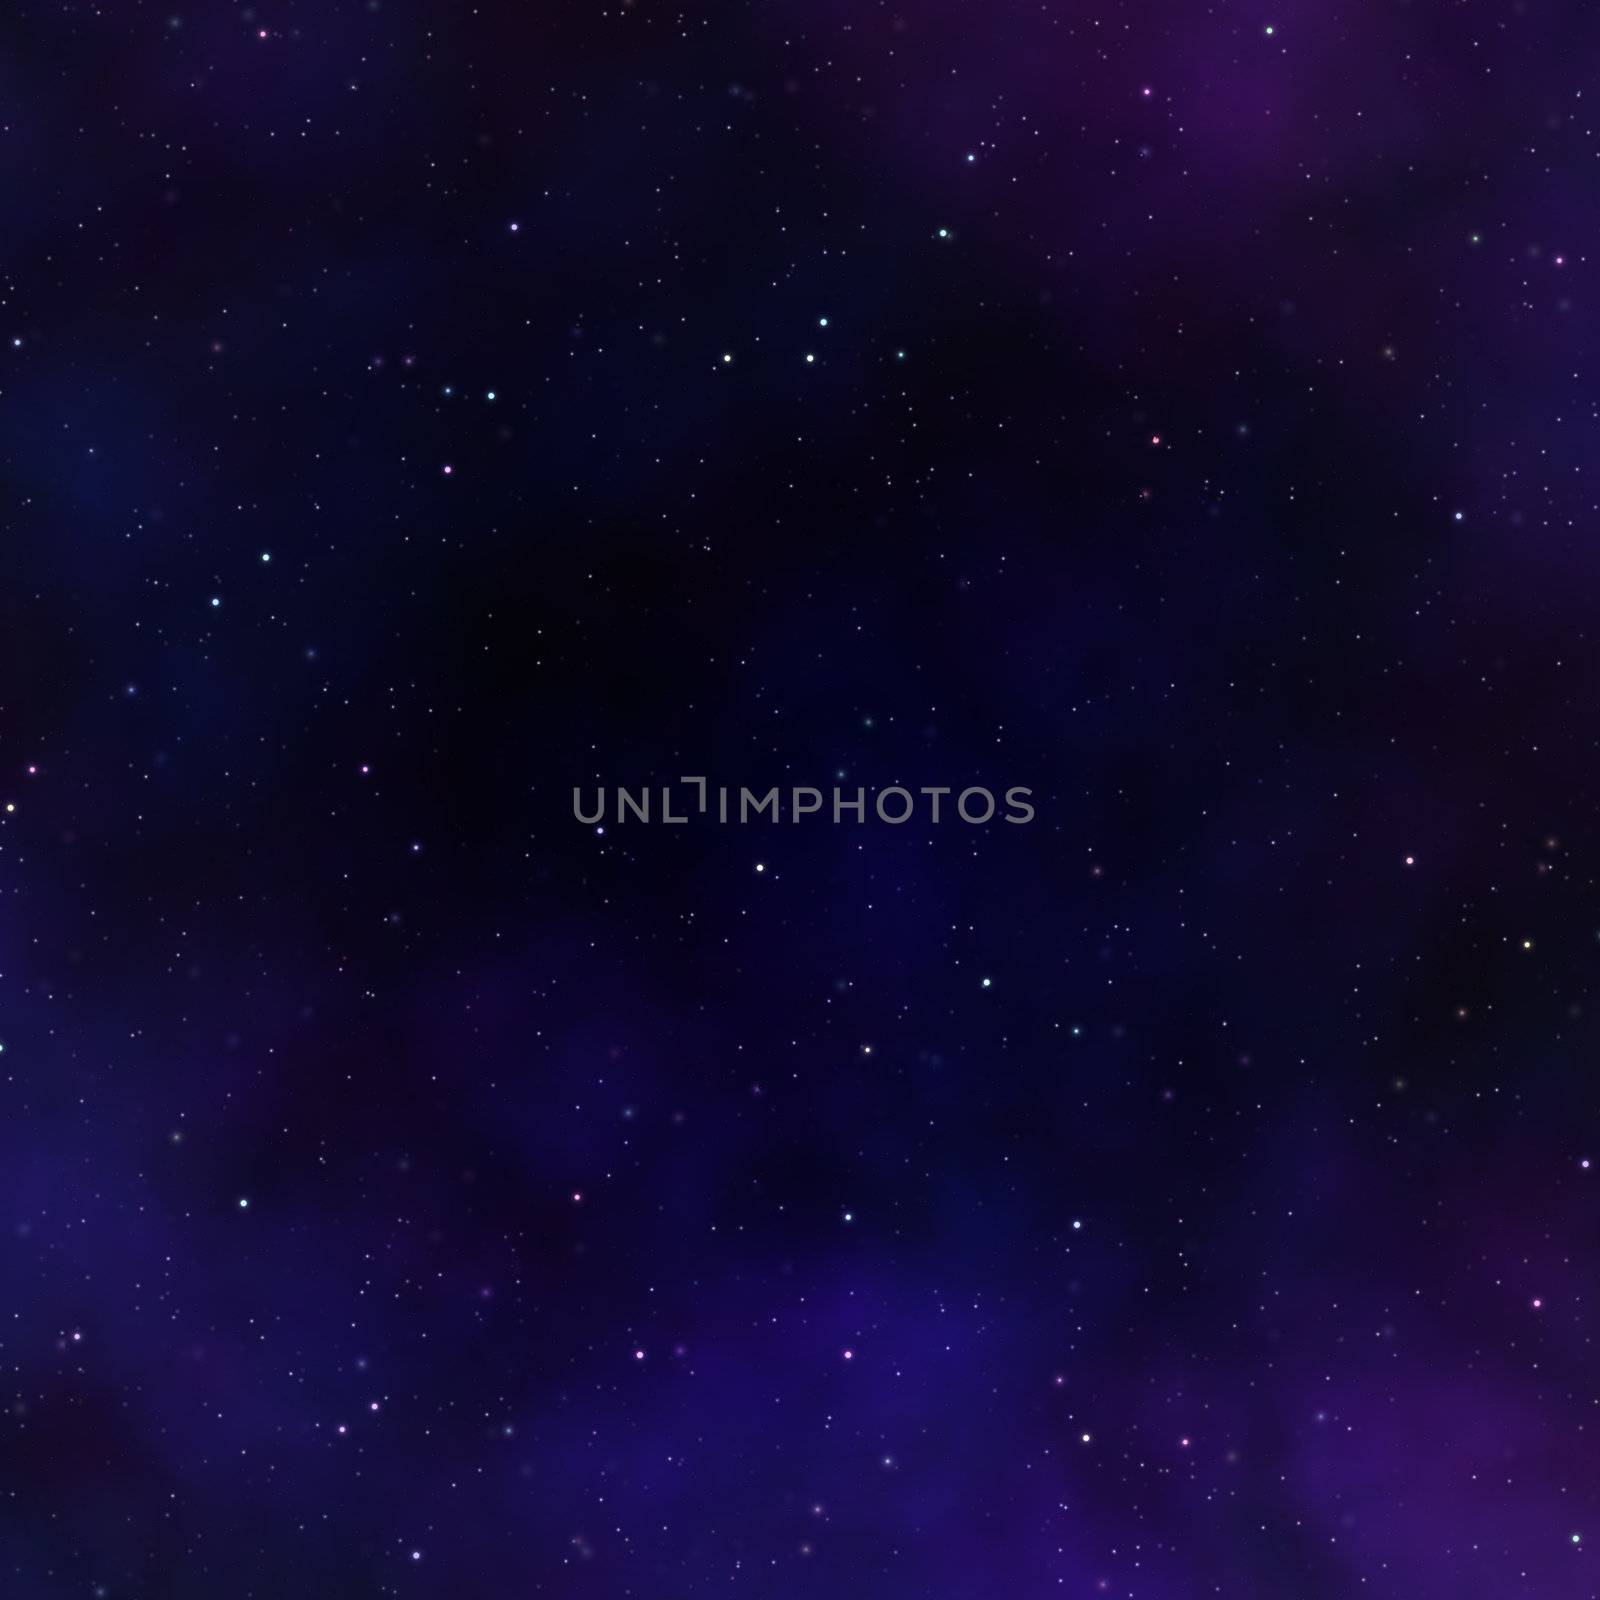 An image of a detailed stars background